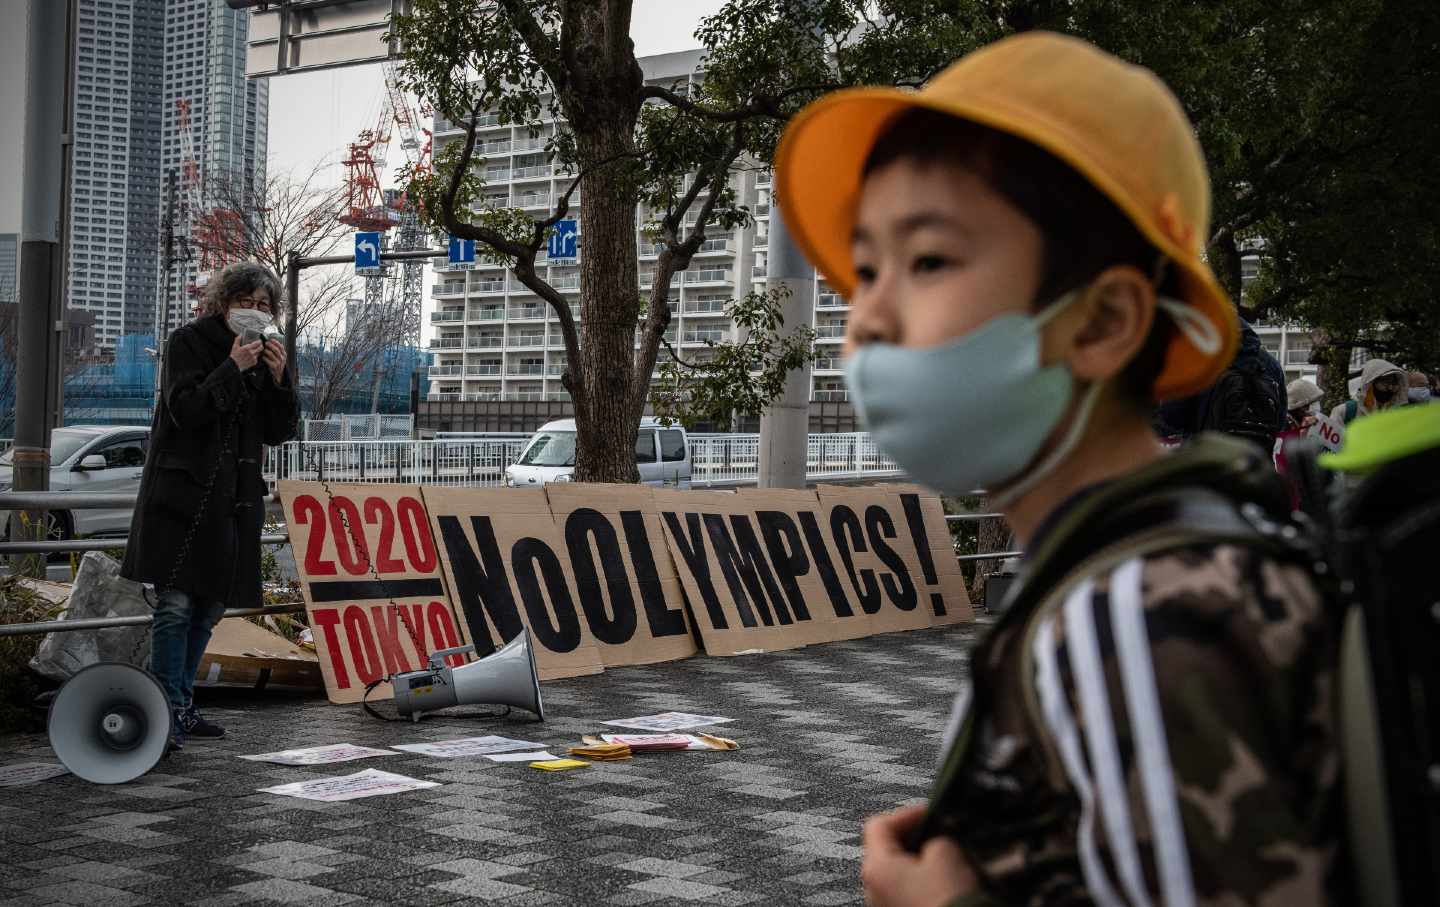 A young schoolboy in a mask, wearing a black jacket with three white stripes and an orange bucket hat, walks past a banner saying “No Olympics” during a protest calling for the Tokyo Olympics to be canceled.